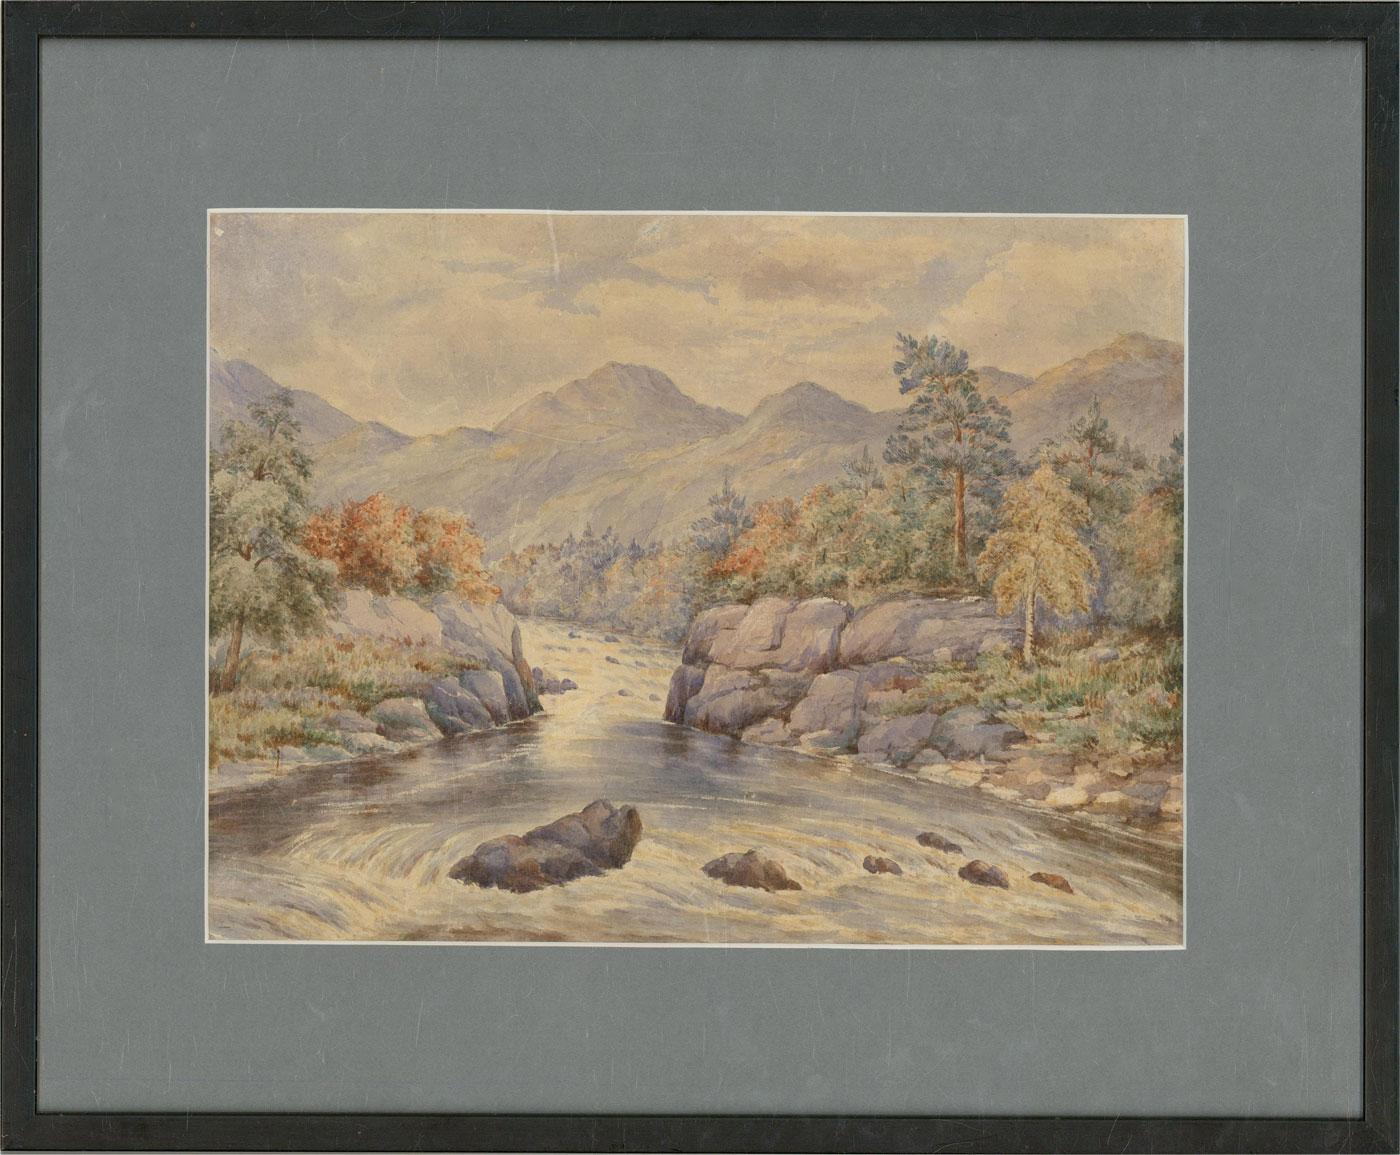 Unknown Landscape Art - Mid 19th Century Watercolour - River View with Mountains